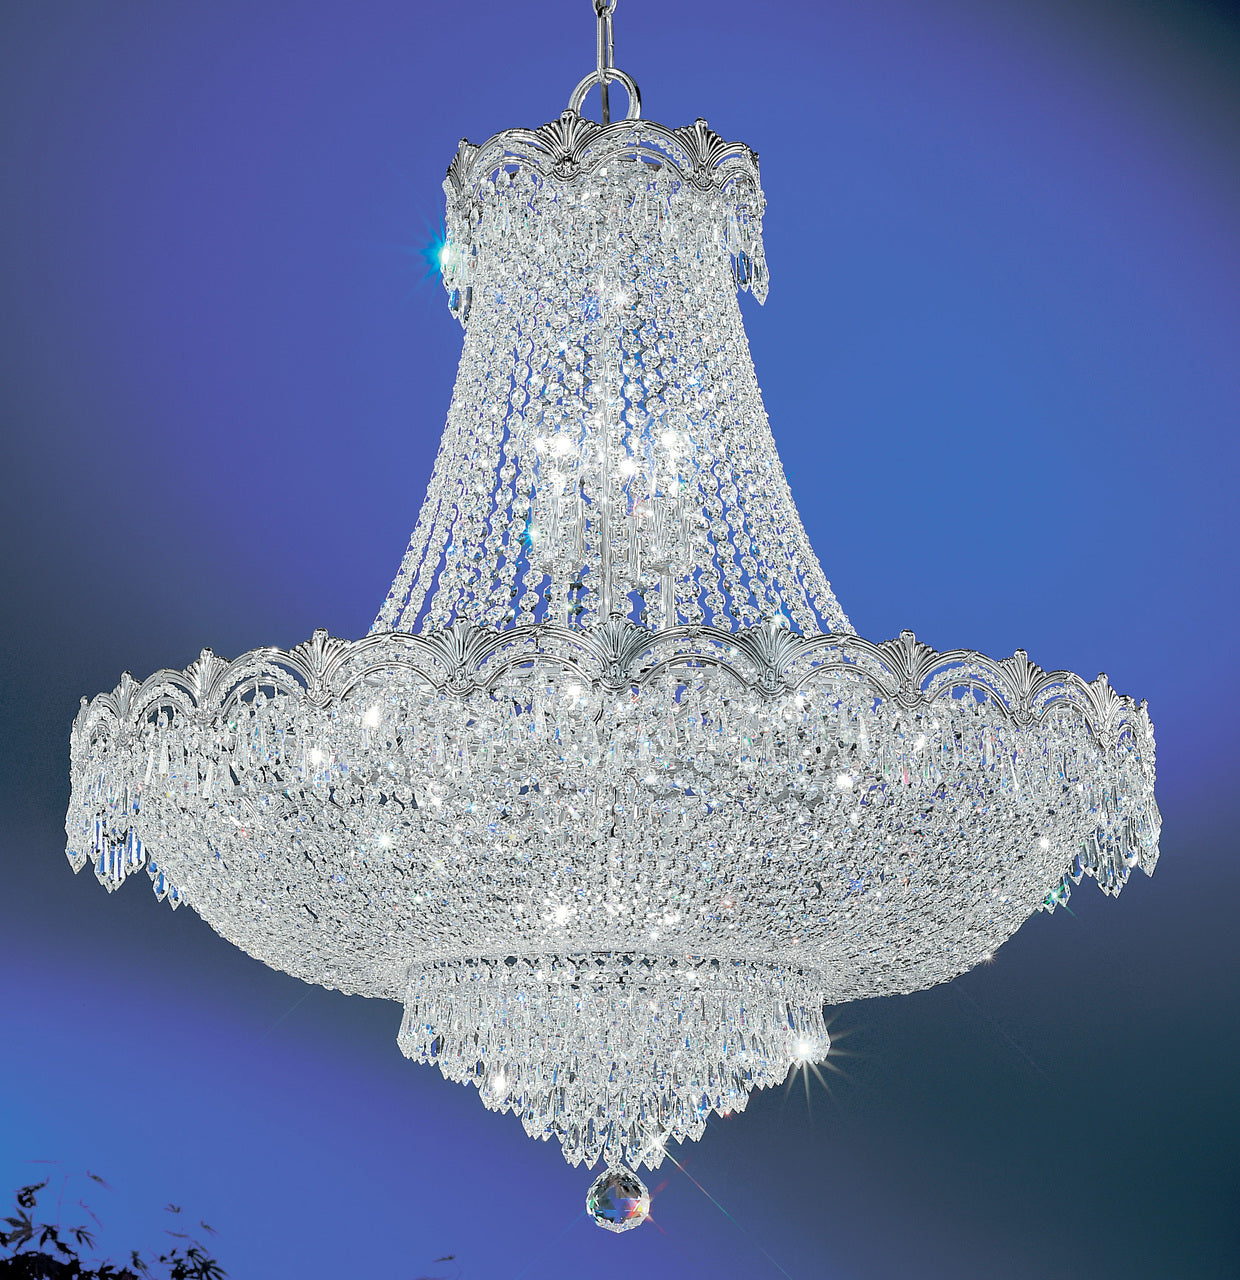 Classic Lighting 1858 CHB CP Regency II Crystal Chandelier in Chrome/Black Patina (Imported from Spain)